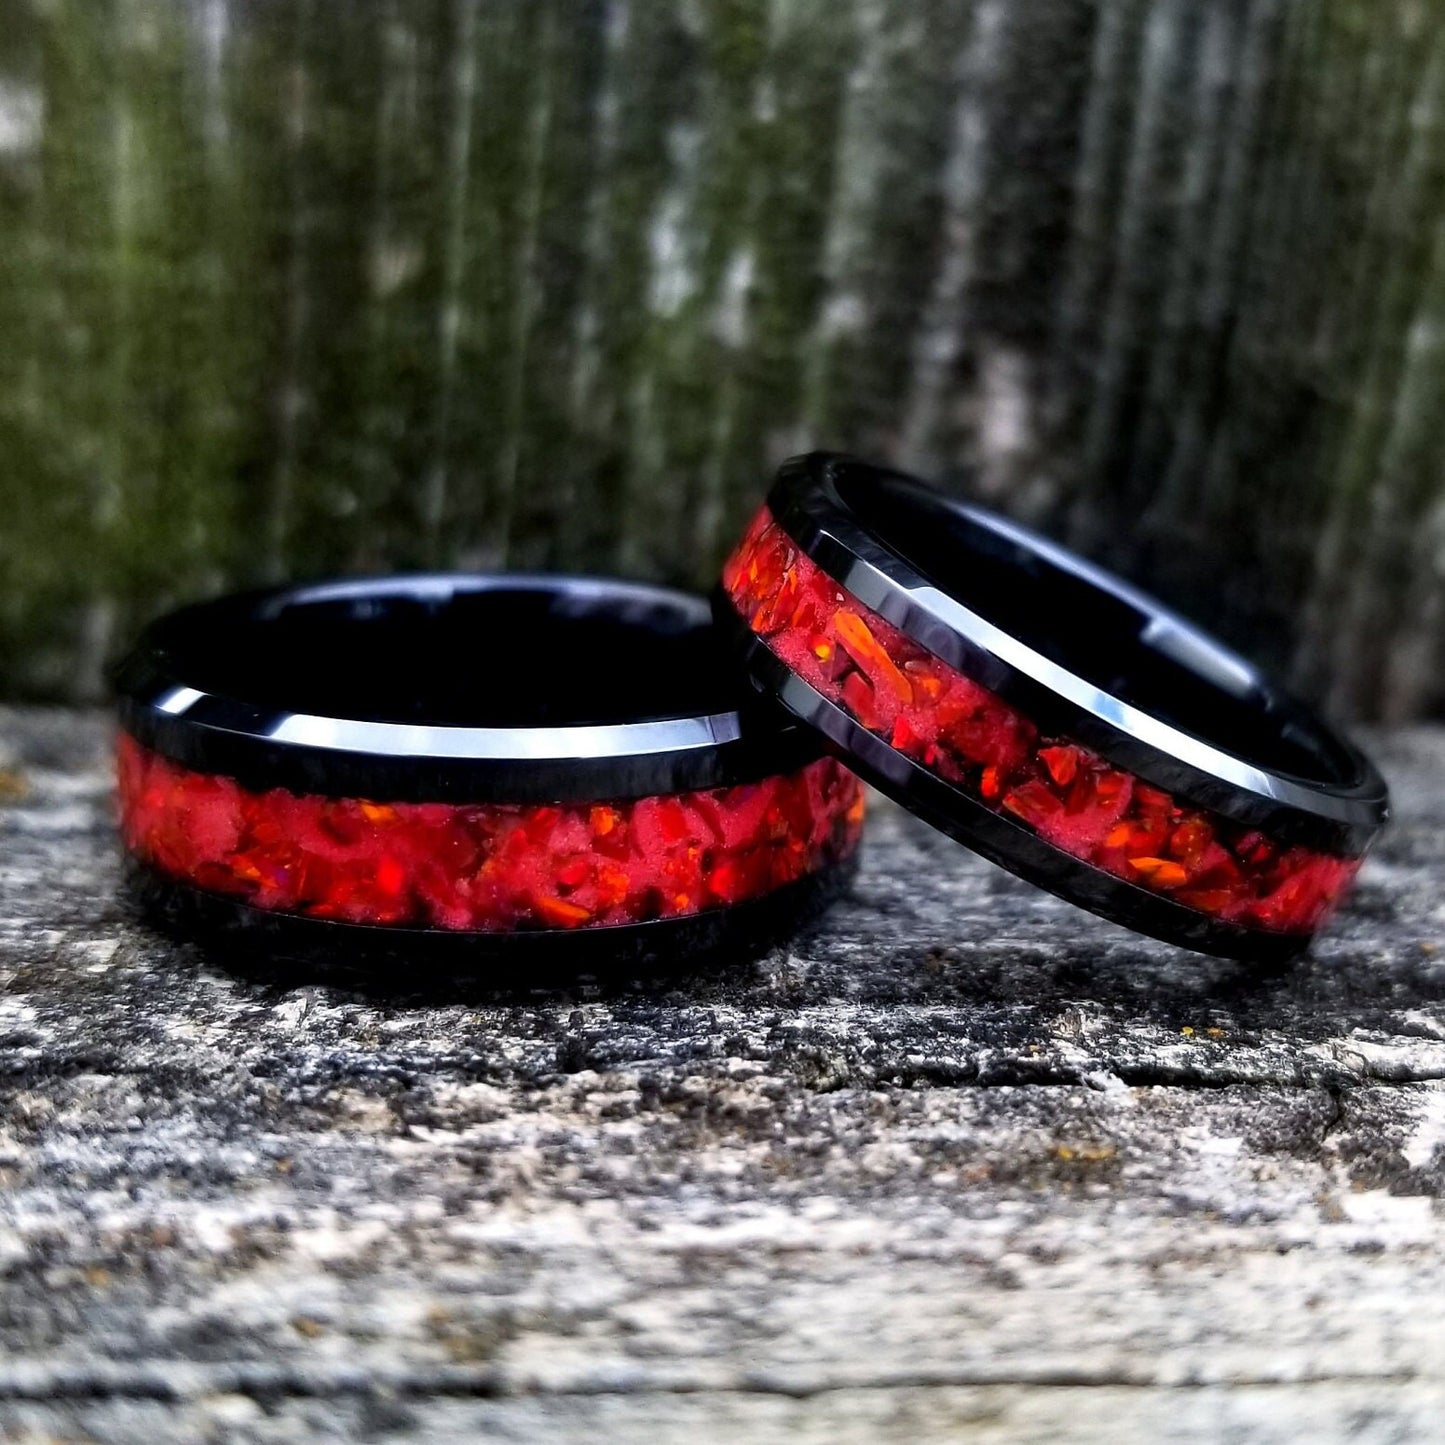 His and Hers Wedding Ring Set. Opal rings. Black Ceramic ring set with red fire opal and glowstone inlay. 8mm and 6mm rings. Sizes 5-13